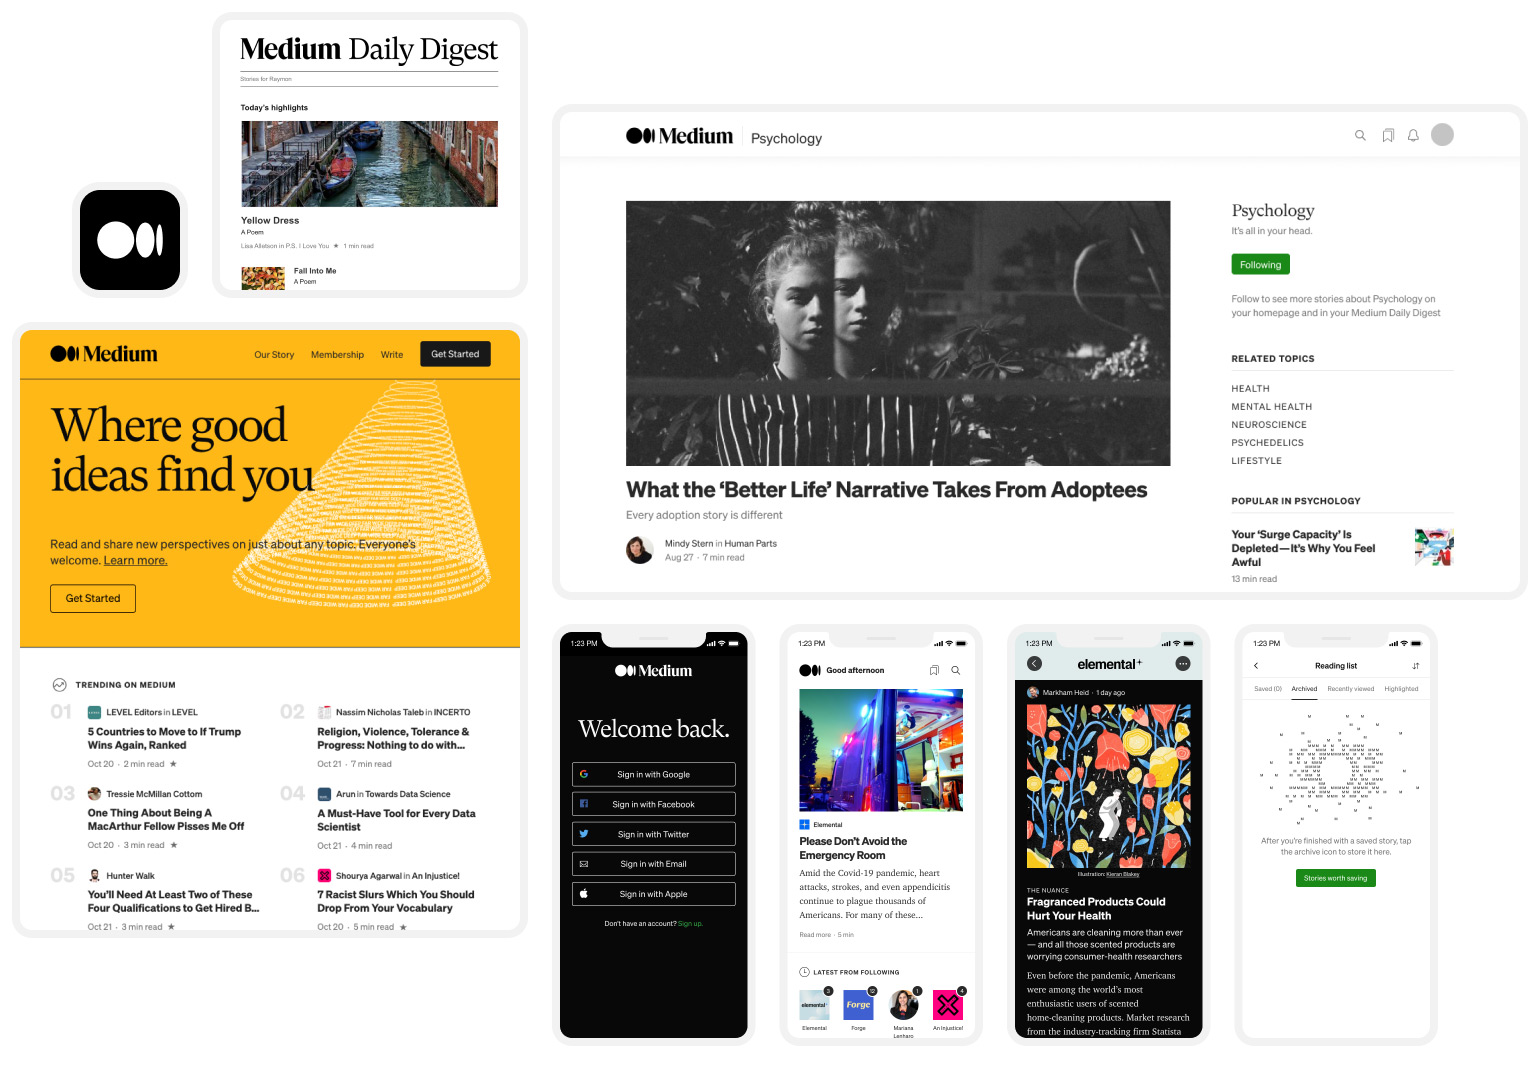 Medium's evolved brand as seen on various product surfaces, including dark mode on app. Additional designs by Abby Aker (email digest) and Ryan Hubbard (web homepage).